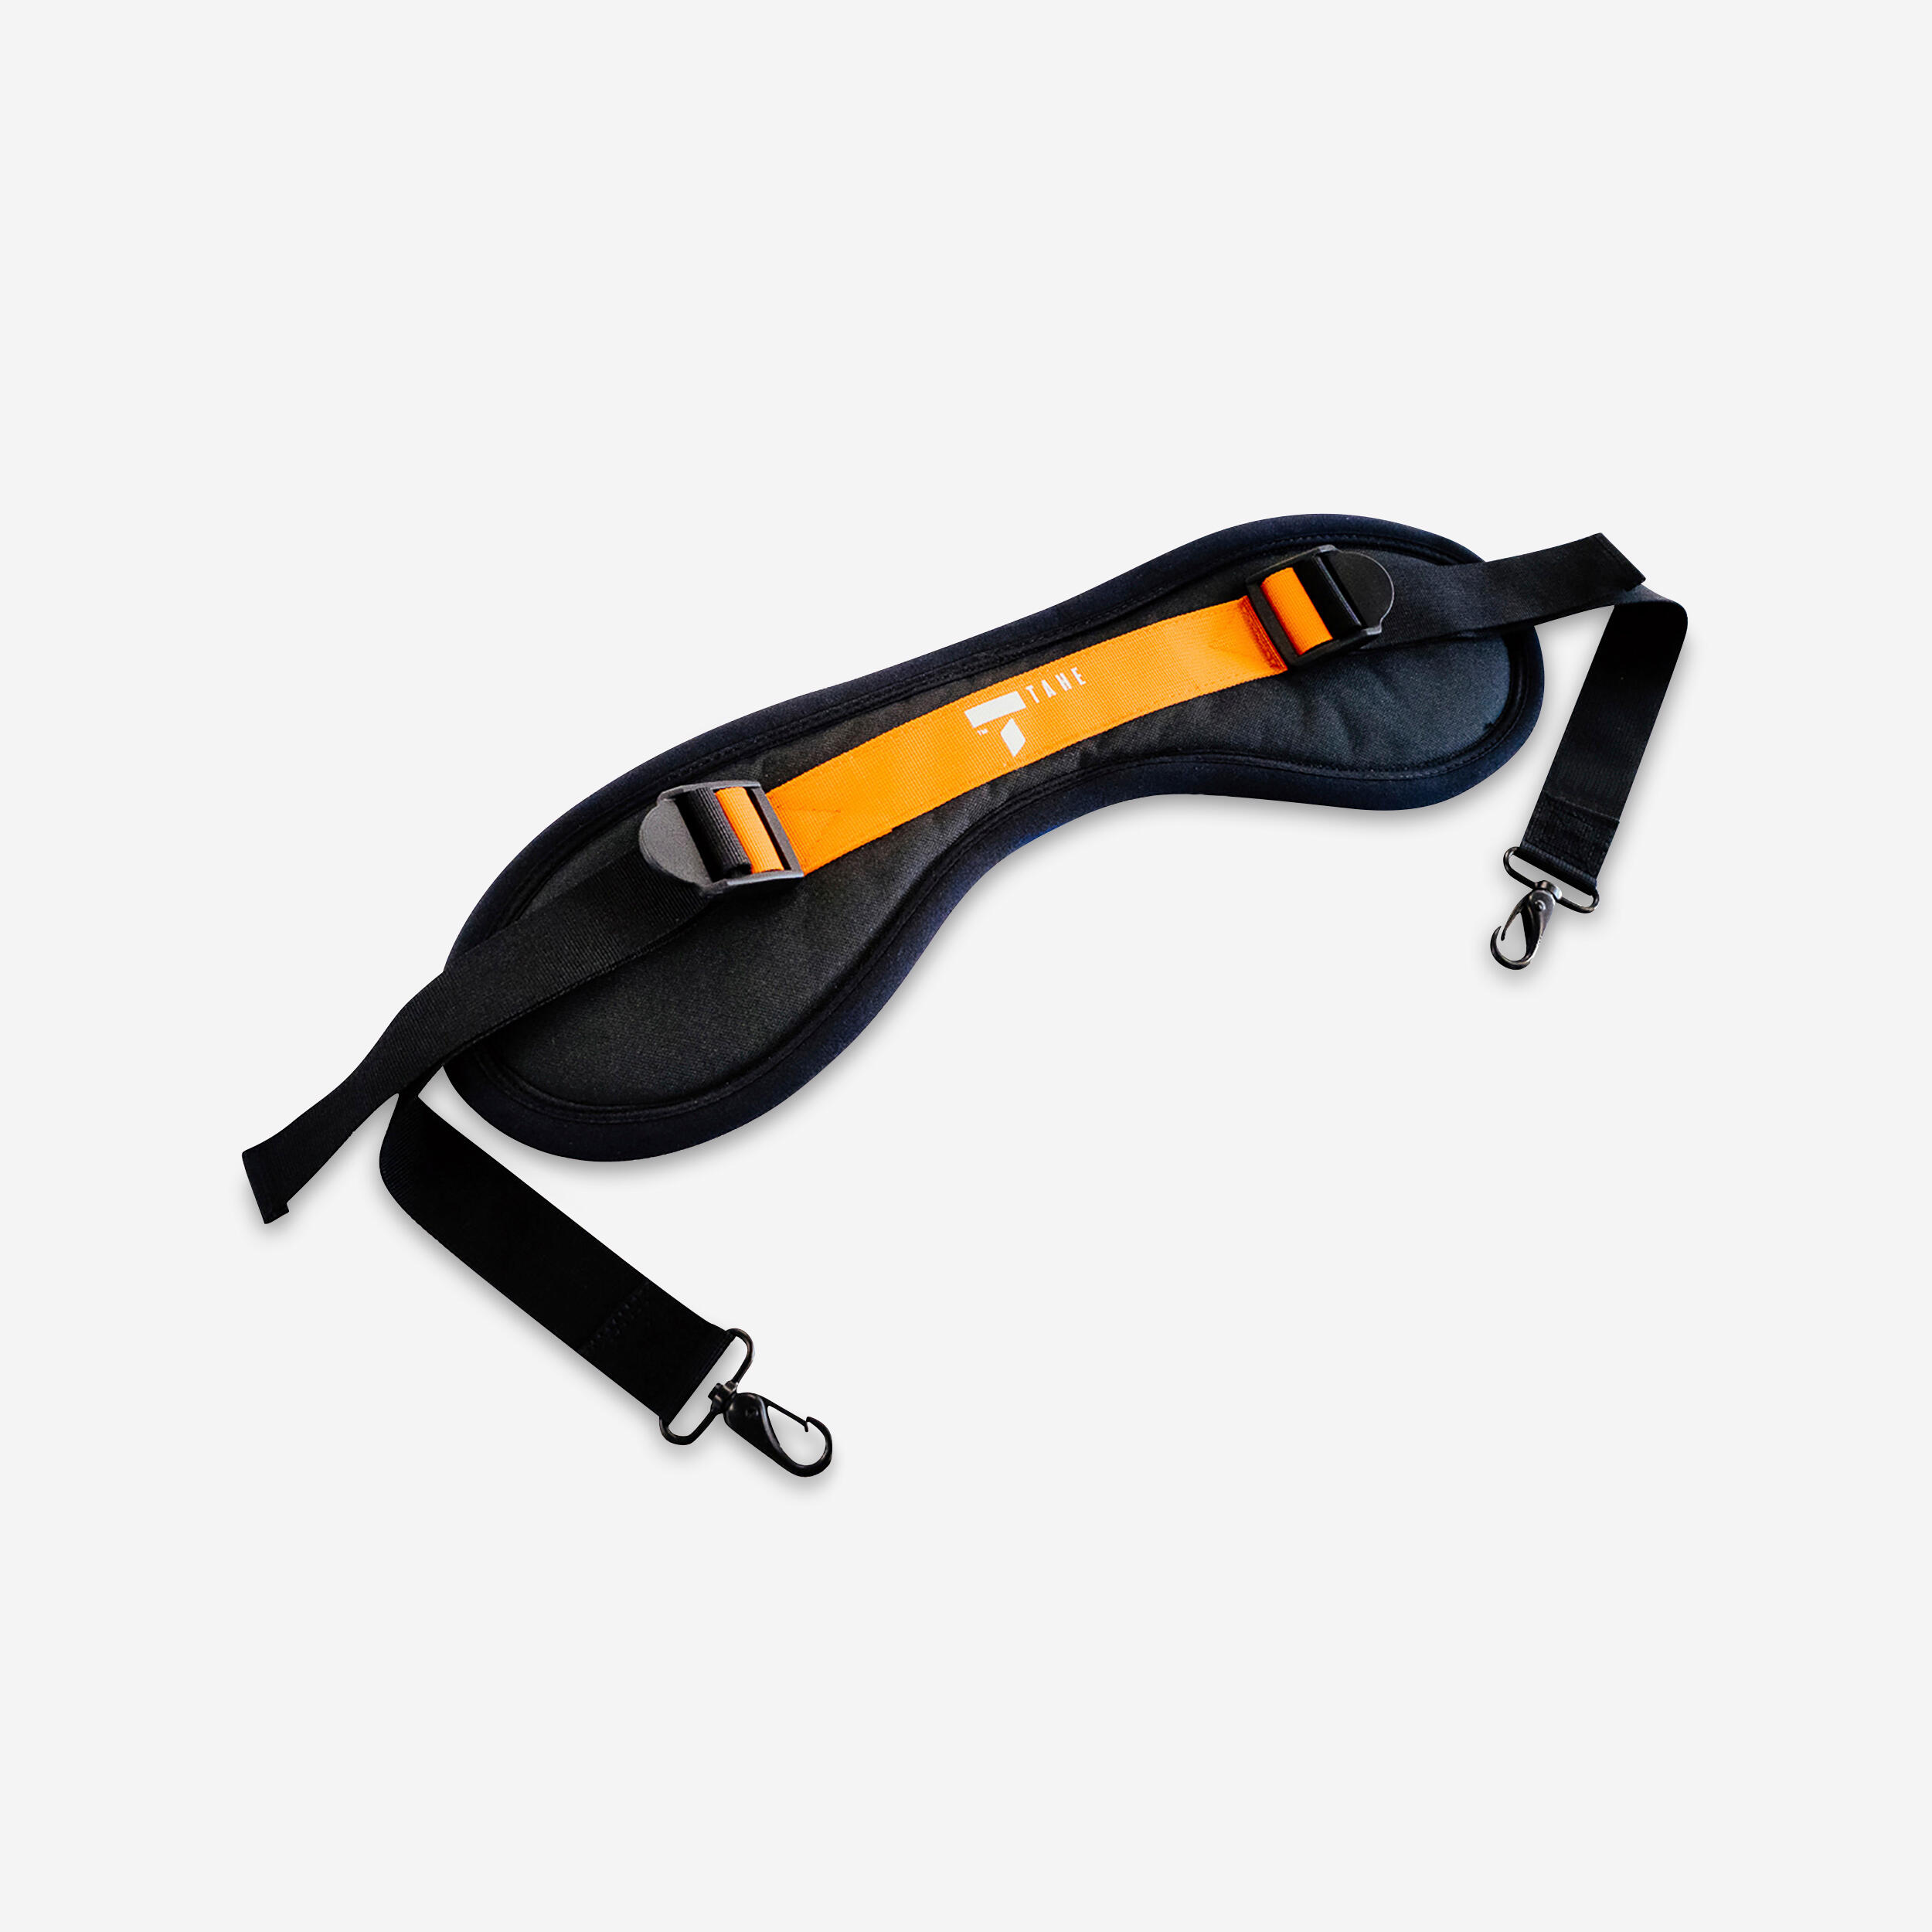 TAHE OUTDOORS THIGH STRAP OR CARRY HANDLE TAHE FOR A RIGID KAYAK